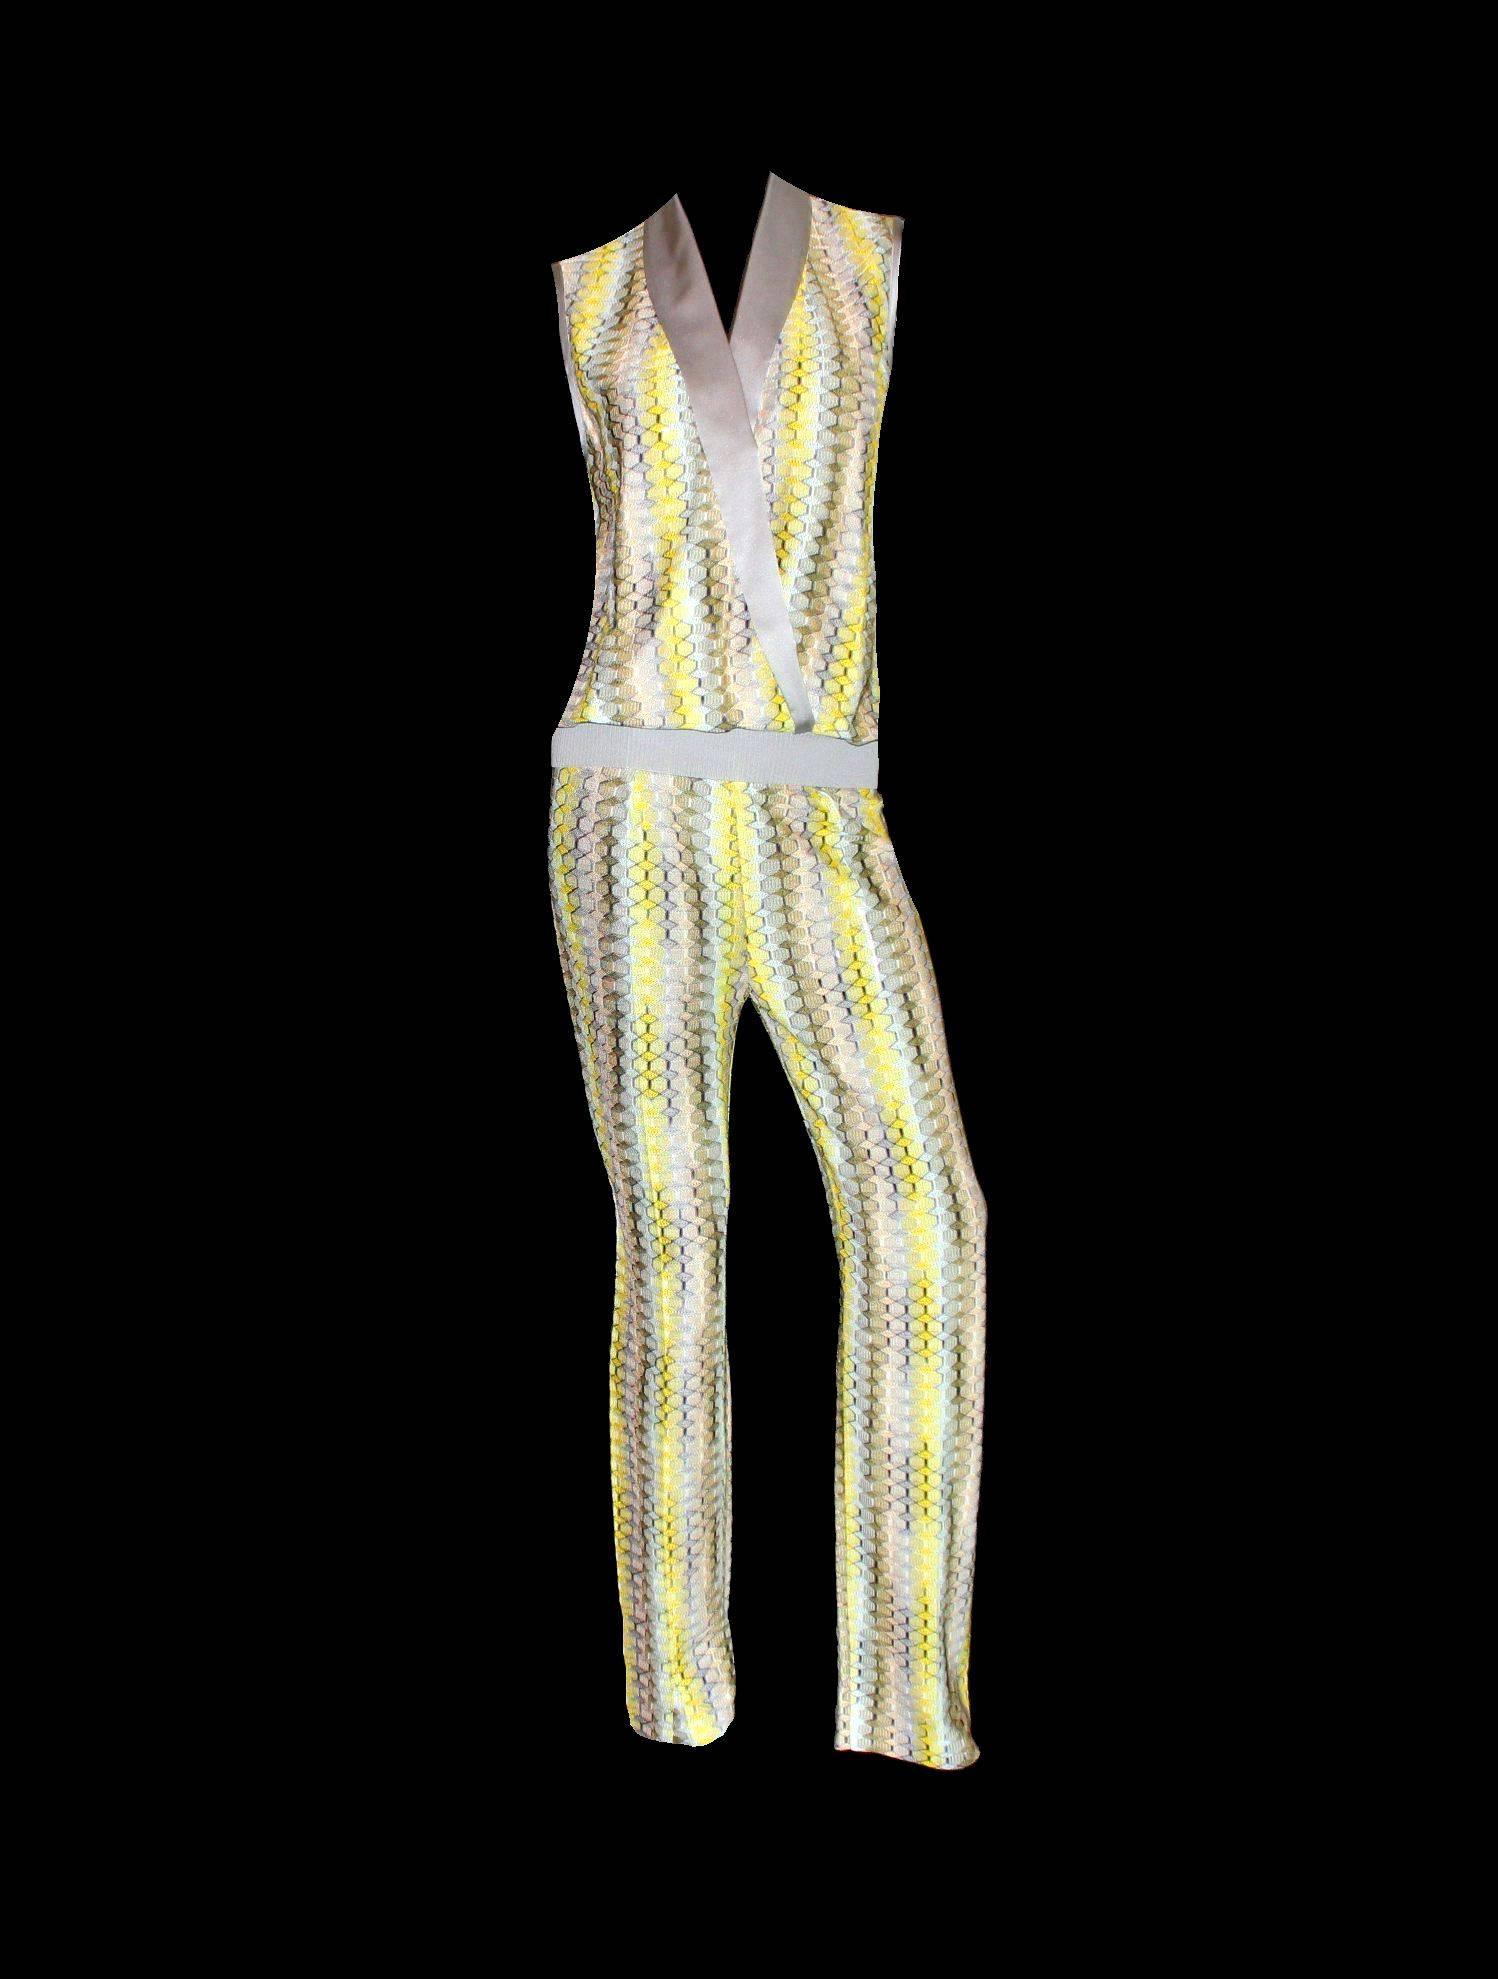 Beautiful Missoni as Jumpsuit ensemble
Consisting of 2 pieces
Can be worn as a complete outfit or seperate    
MISSONI Main Line
    Classic MISSONI signature zigzag crochet knit
    Satin silky trimming
    Simply slips on
    Sexy deep neck (can